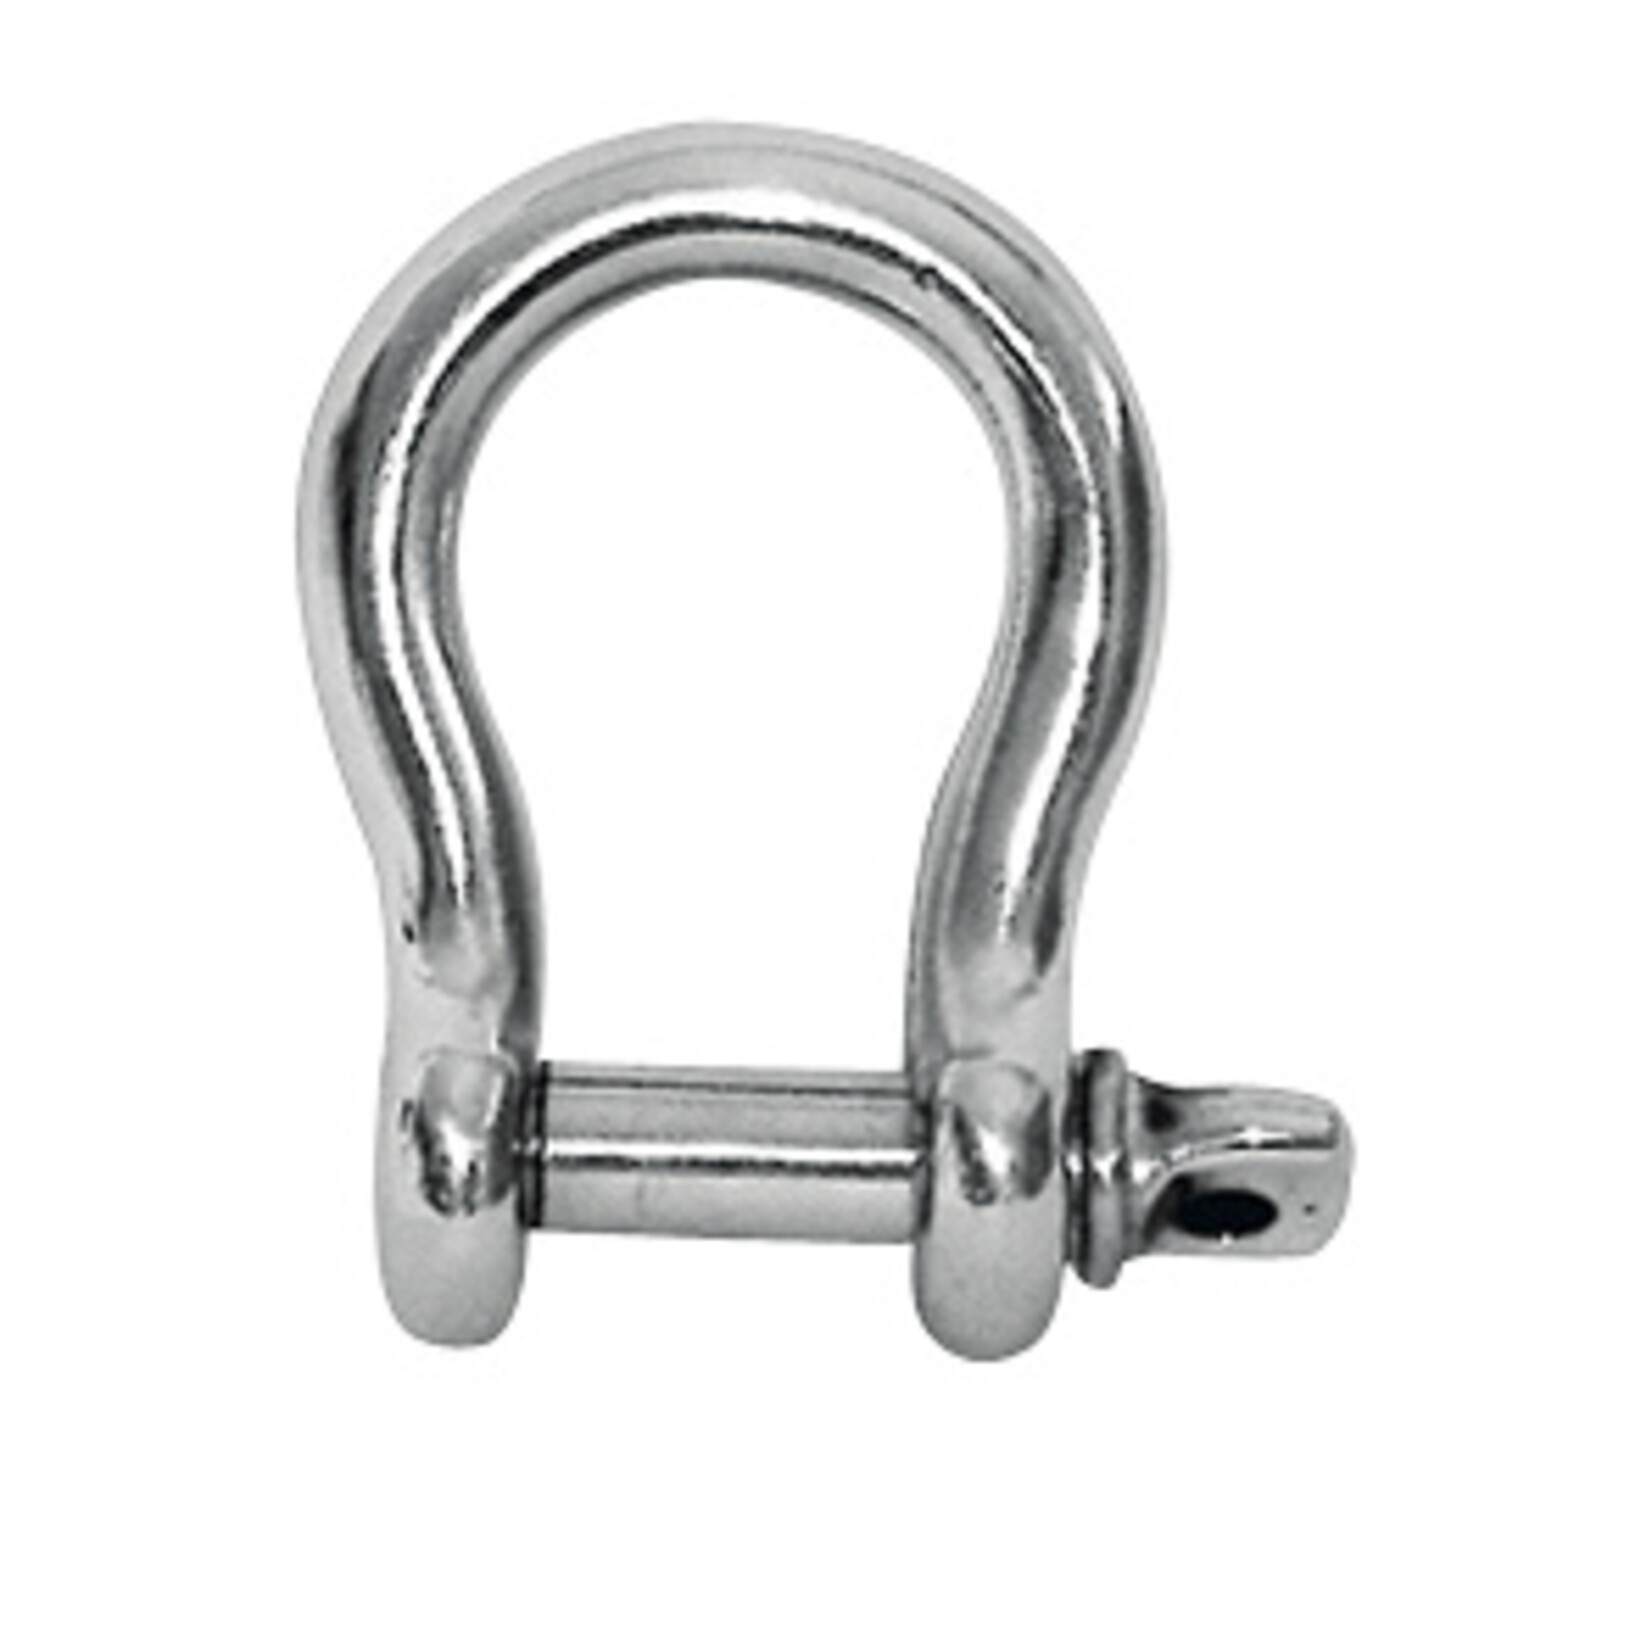 Plastimo St.s bow shackle d.5mm